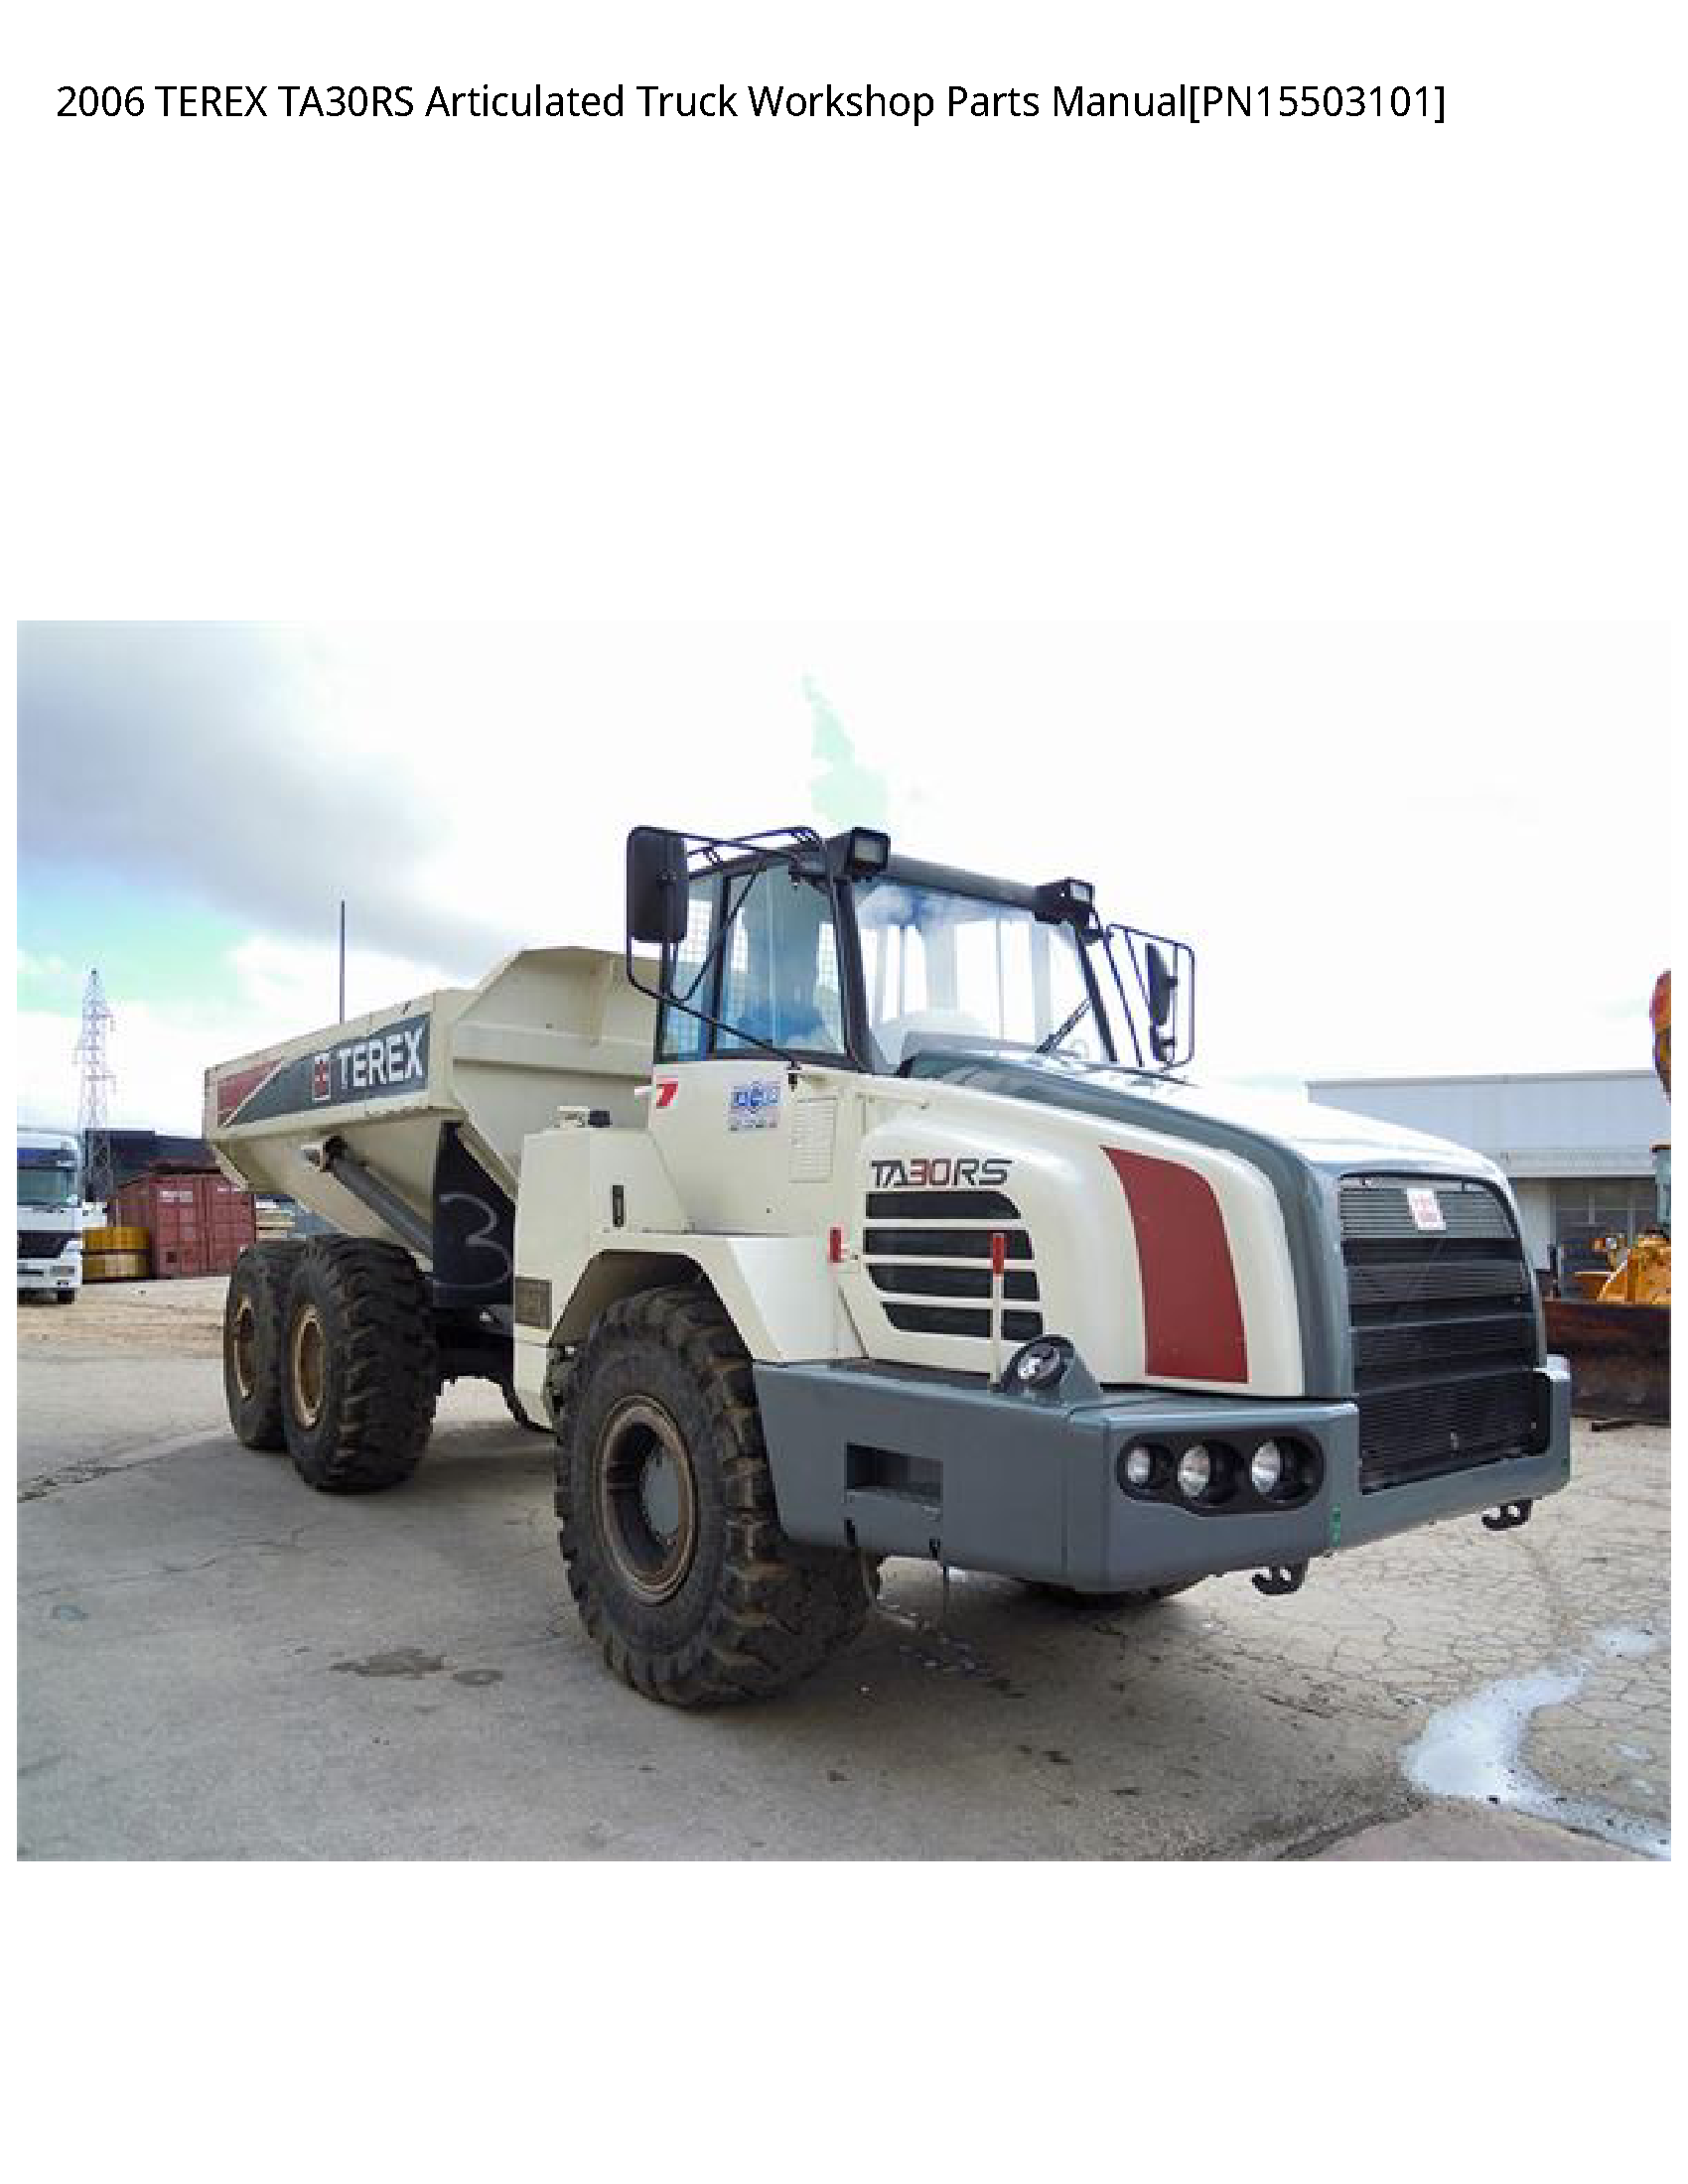 Terex TA30RS Articulated Truck Parts manual